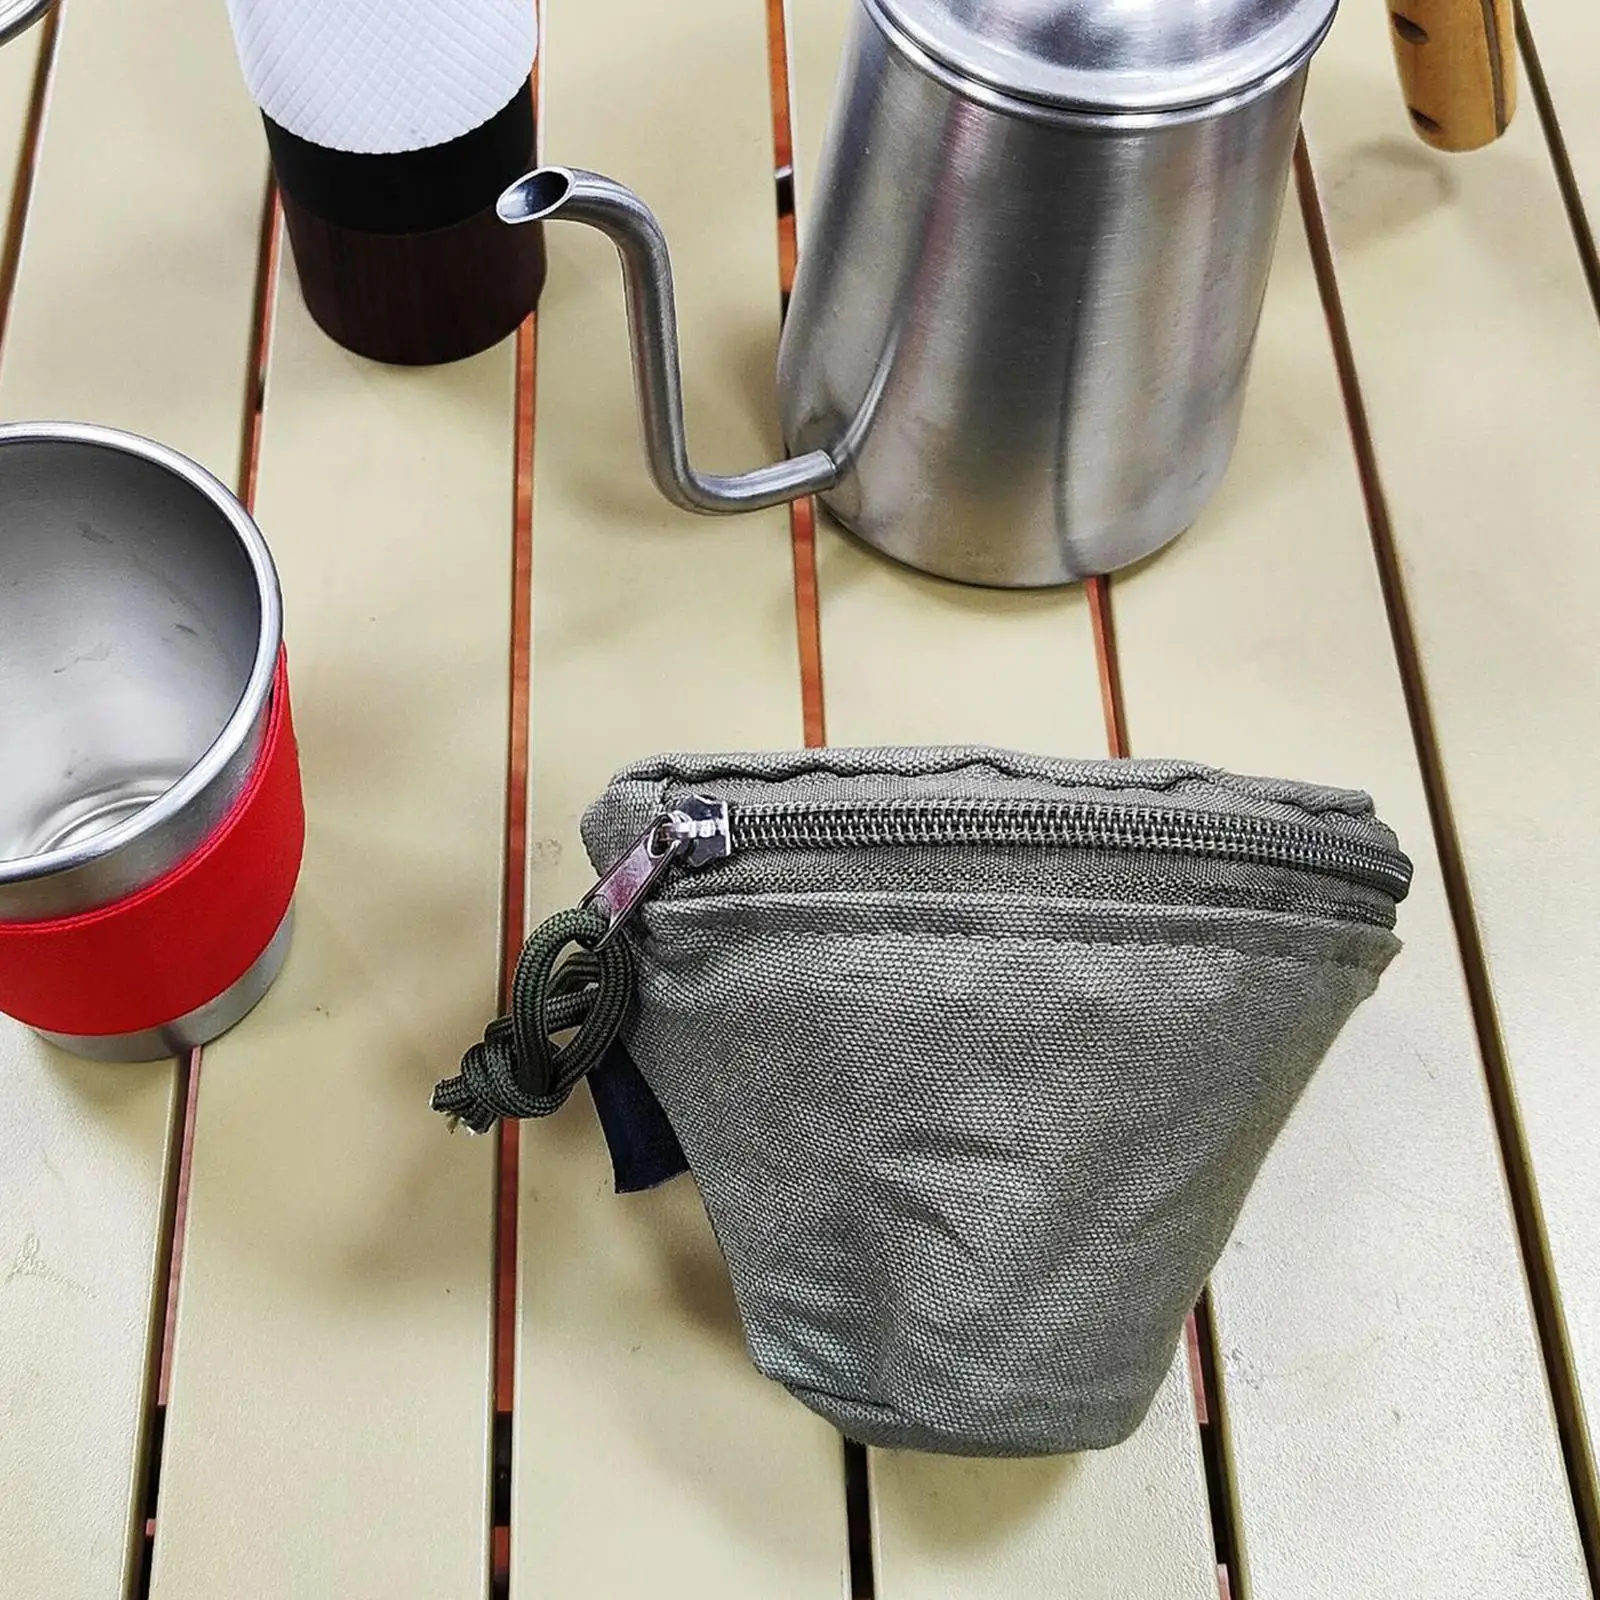 Coffee Filter Paper Storage Case Lightweight Portable Cup Basket Coffee Filters Holder for Indoor Outdoor Camping Accessories